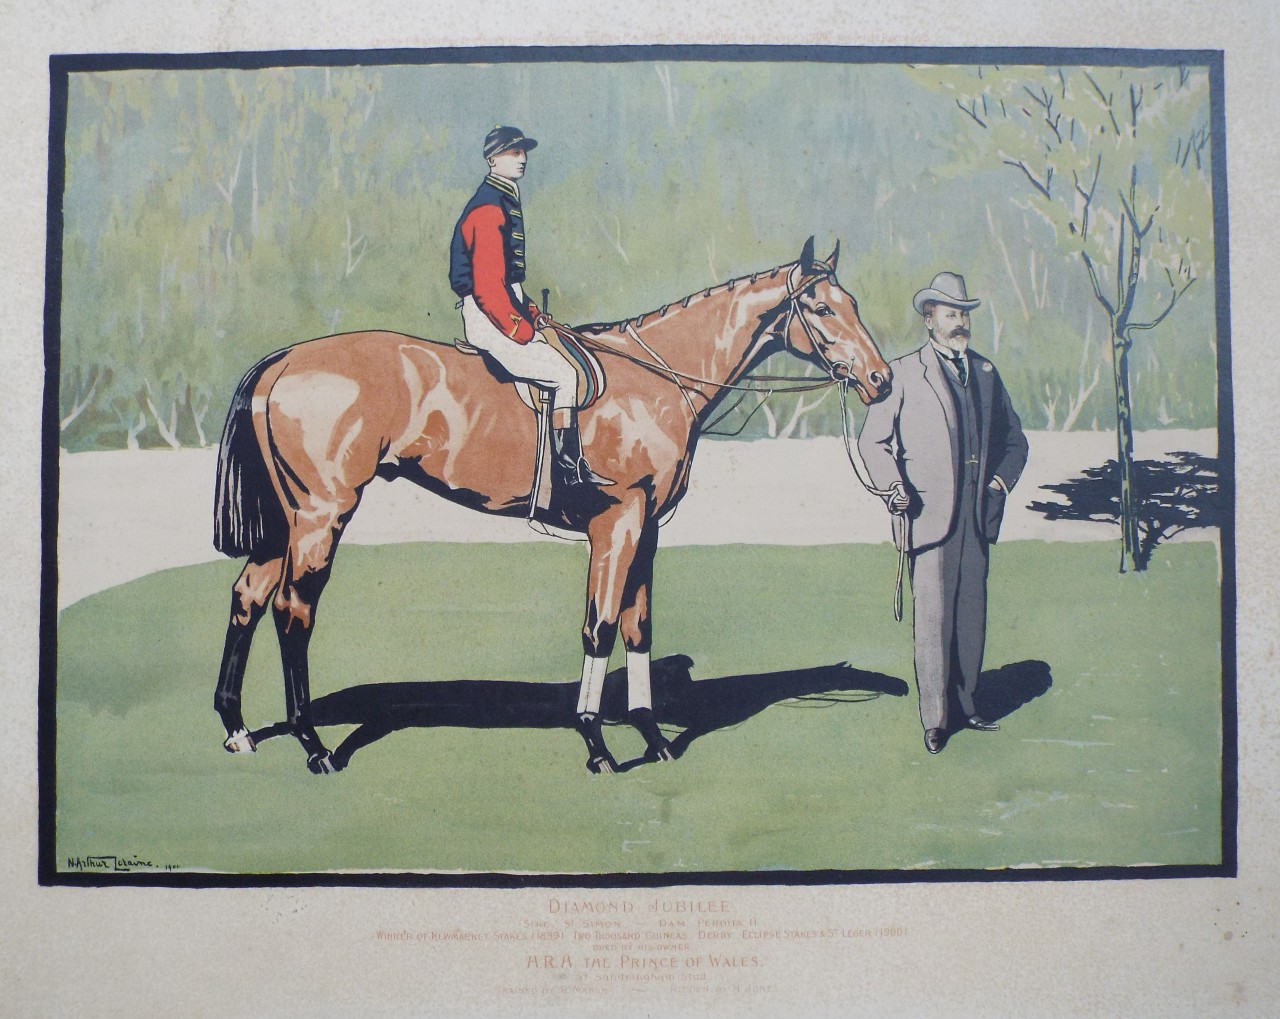 Chromo-lithograph - Diamond Jubilee. Sire St. Simon - Dam. Perdita II. Winner of Newmarket Stakes (1899) Two Thousand Guineas, Derby, Eclipse Stakes & St. Leger (1900) Bred by his Owner. H.R.H. the Prince of Wales. at Sandringham Stud. Trained by R. Marsh. Ridden by H. Jones. - Loraine